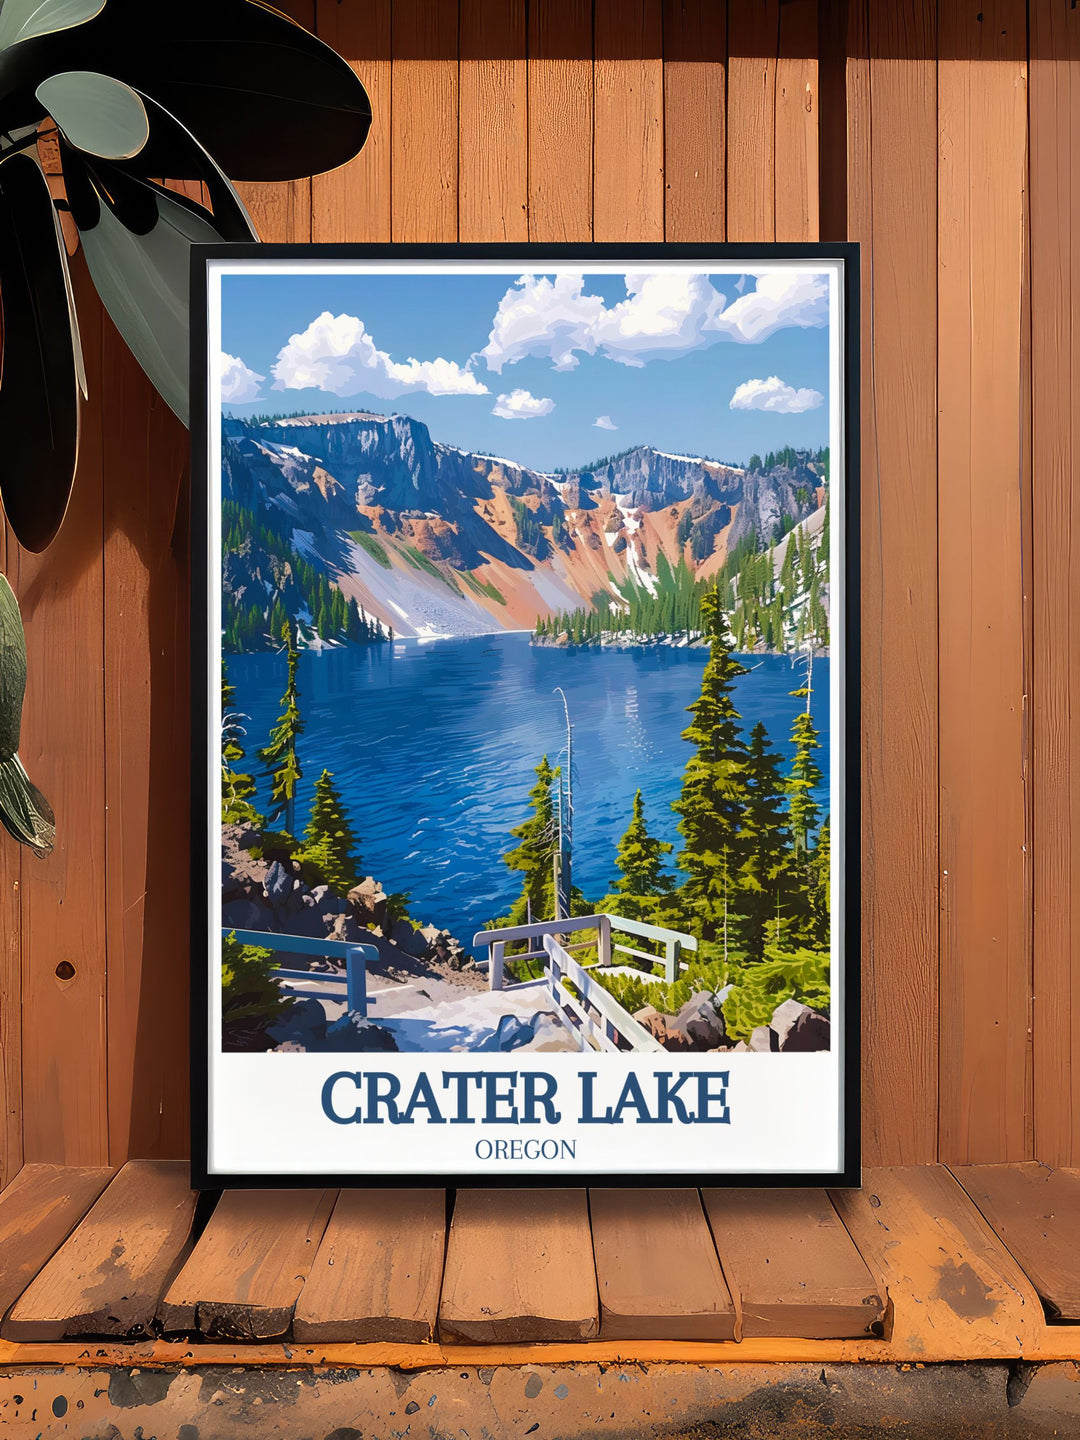 Highlighting the serene vistas of Crater Lake National Park and the vibrant scenery of Cleetwood Cove, this travel poster is perfect for those who appreciate the scenic and adventurous richness of the United States.